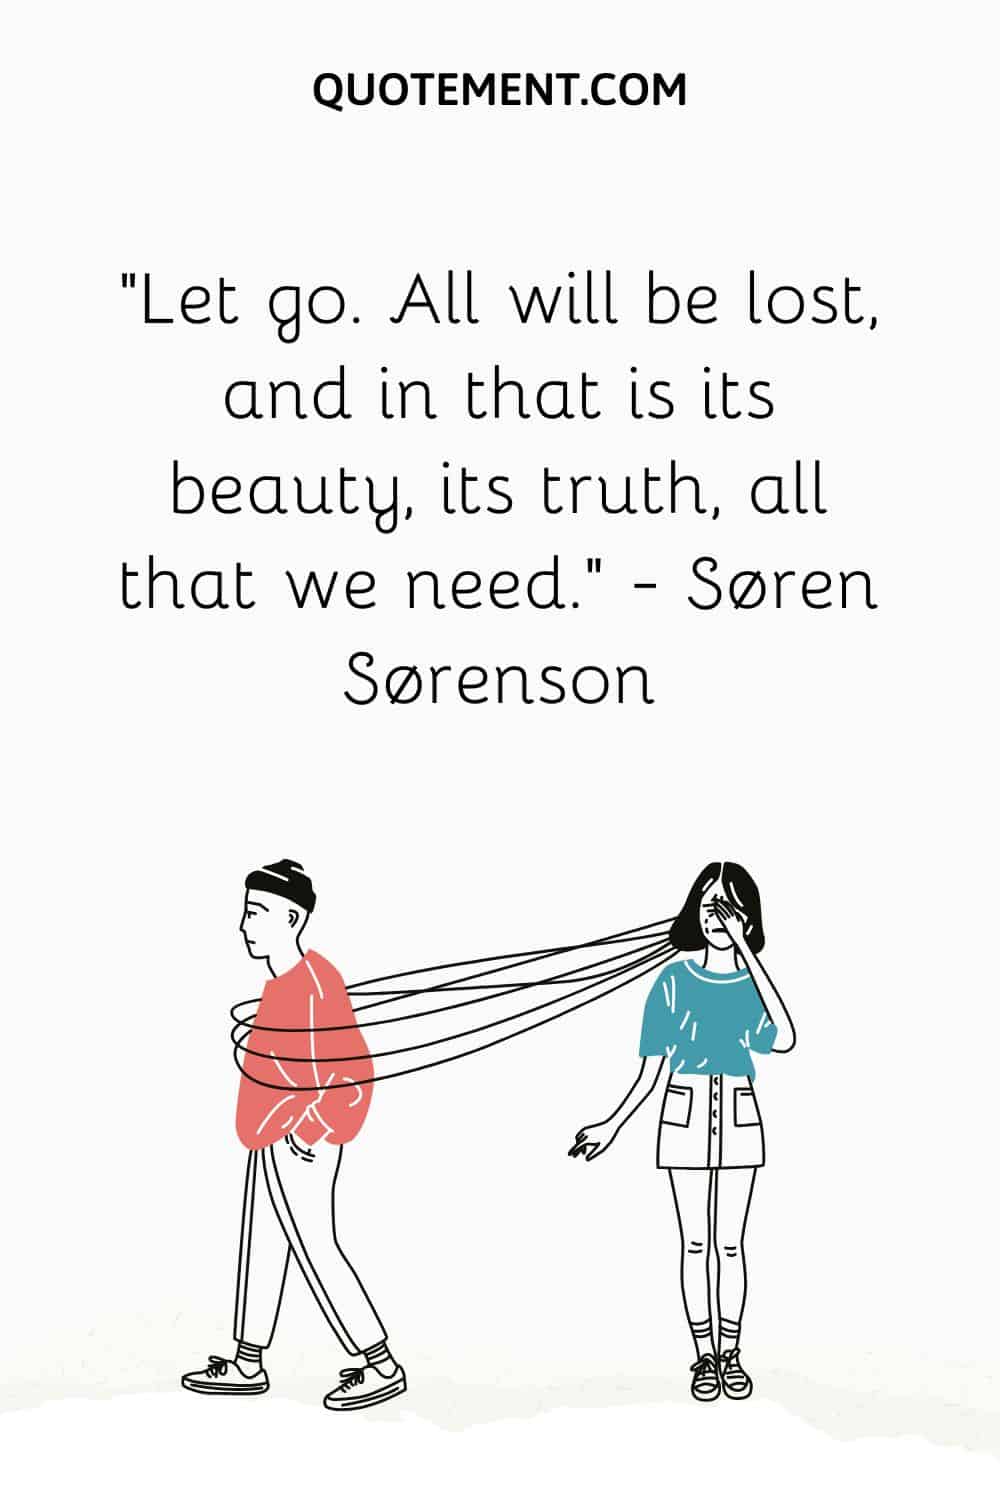 illustration of two people representing goodbye let go quote